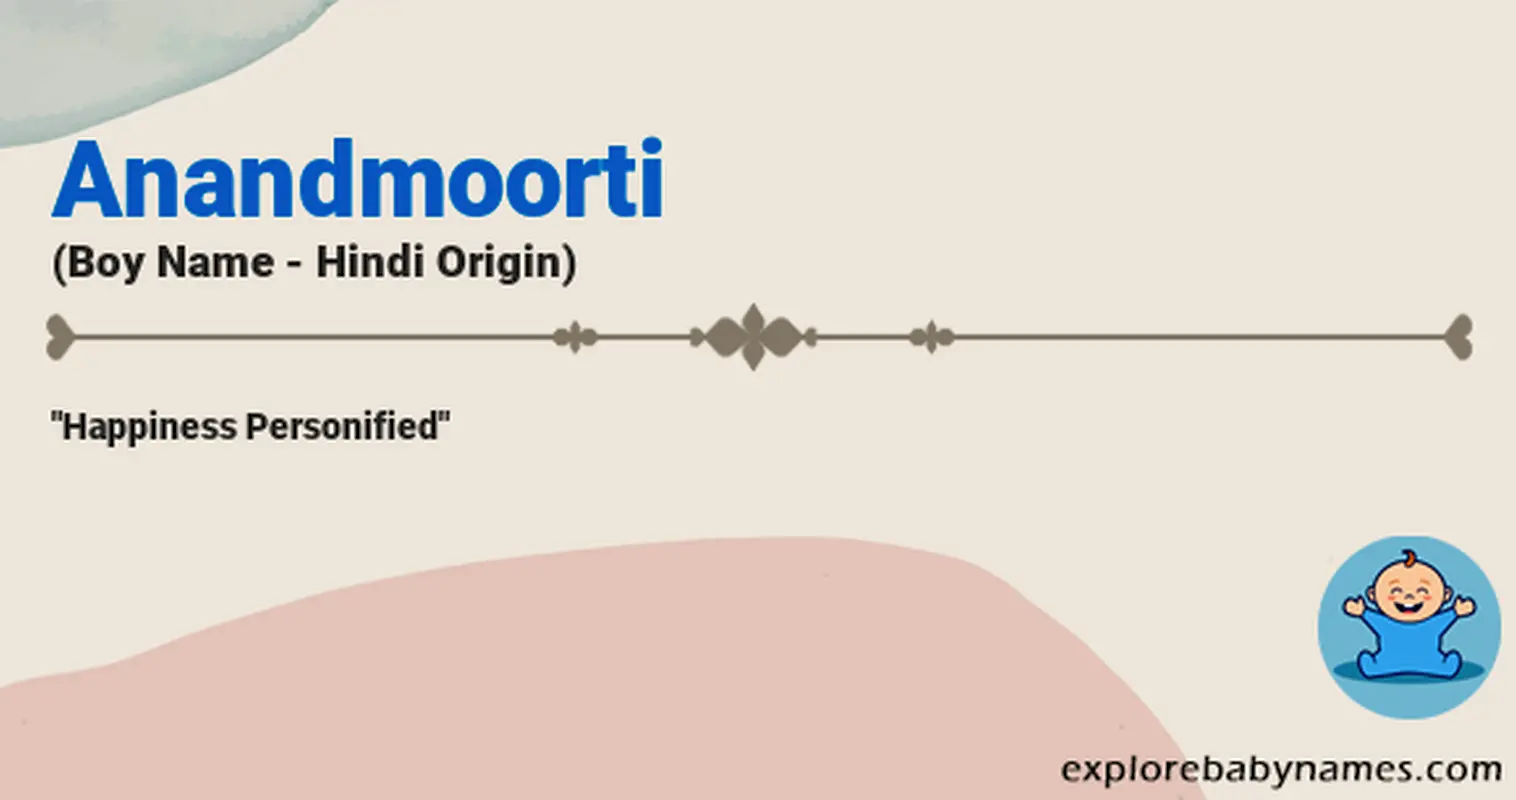 Meaning of Anandmoorti